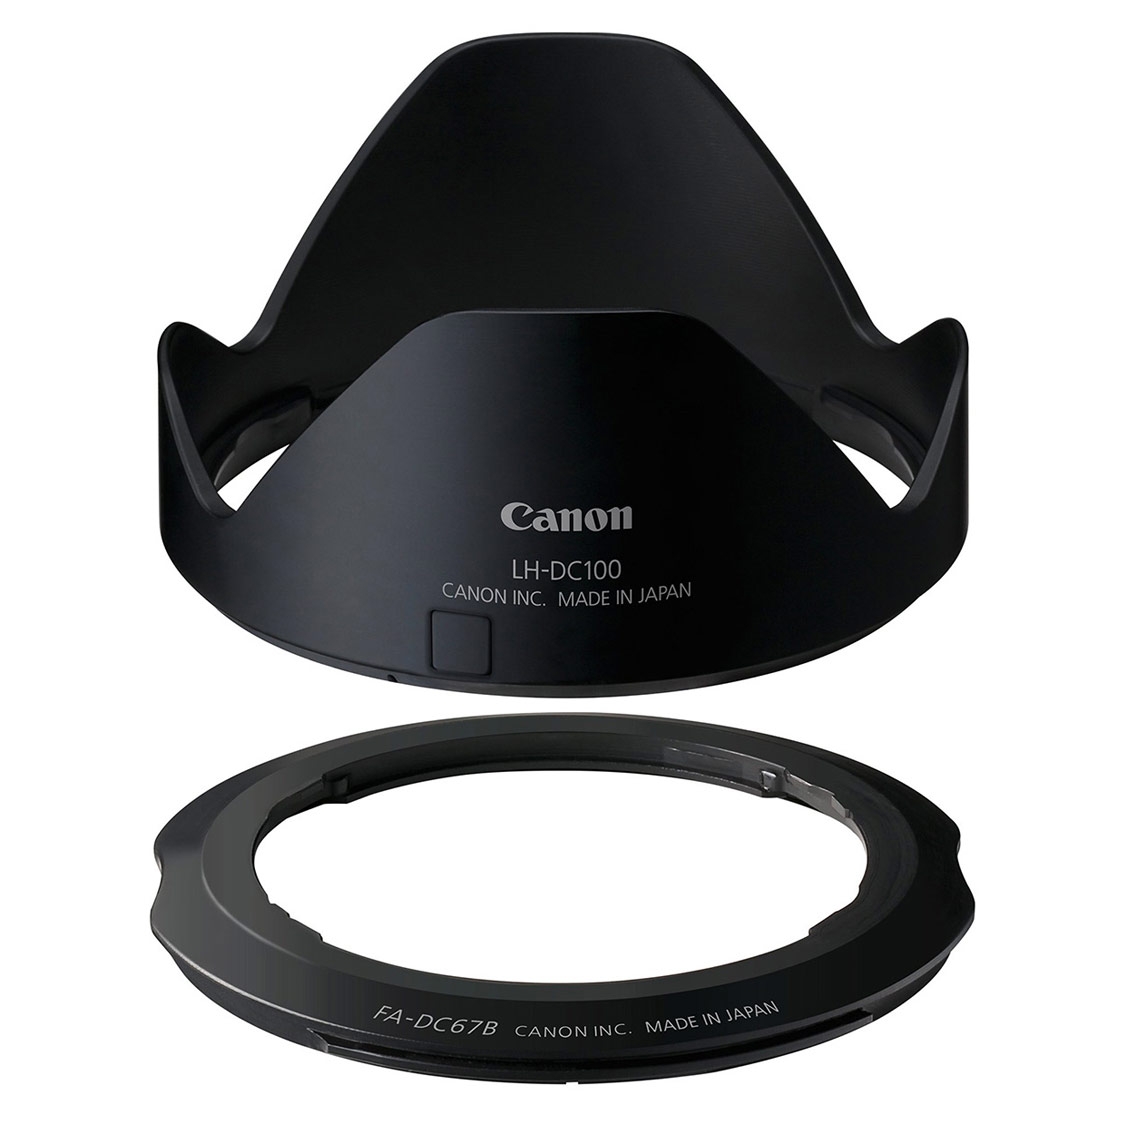 Canon LH-DC100 Lens Hood and FA-DC67B Filter Adapter 